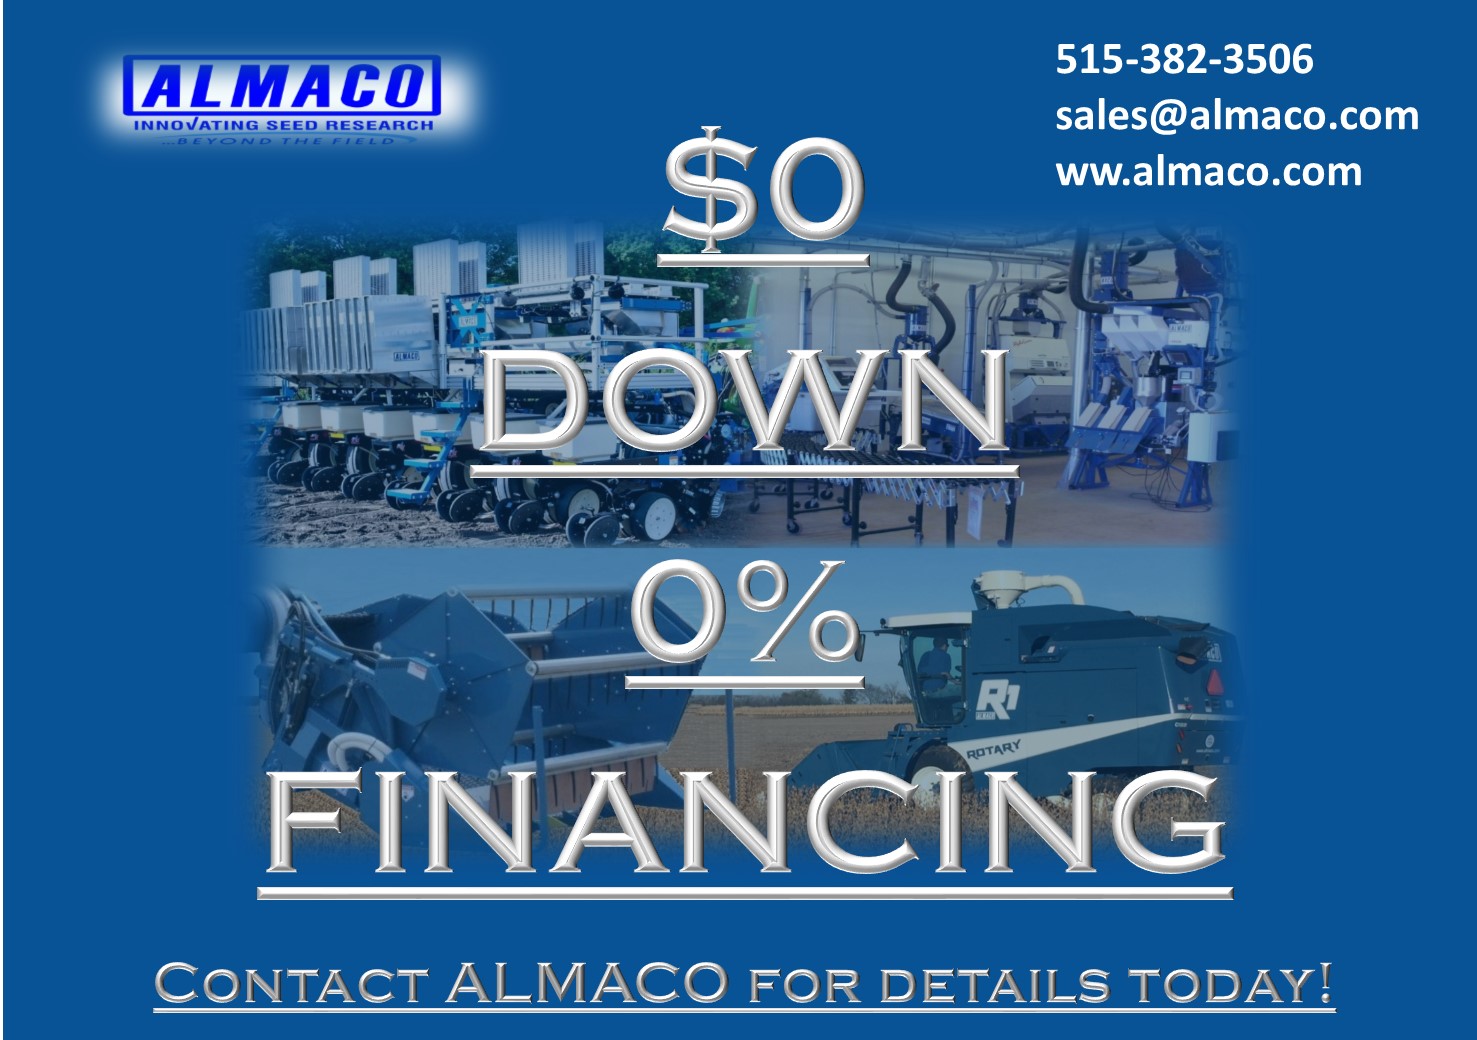 $0 DOWN AND 0% APR FINANCING